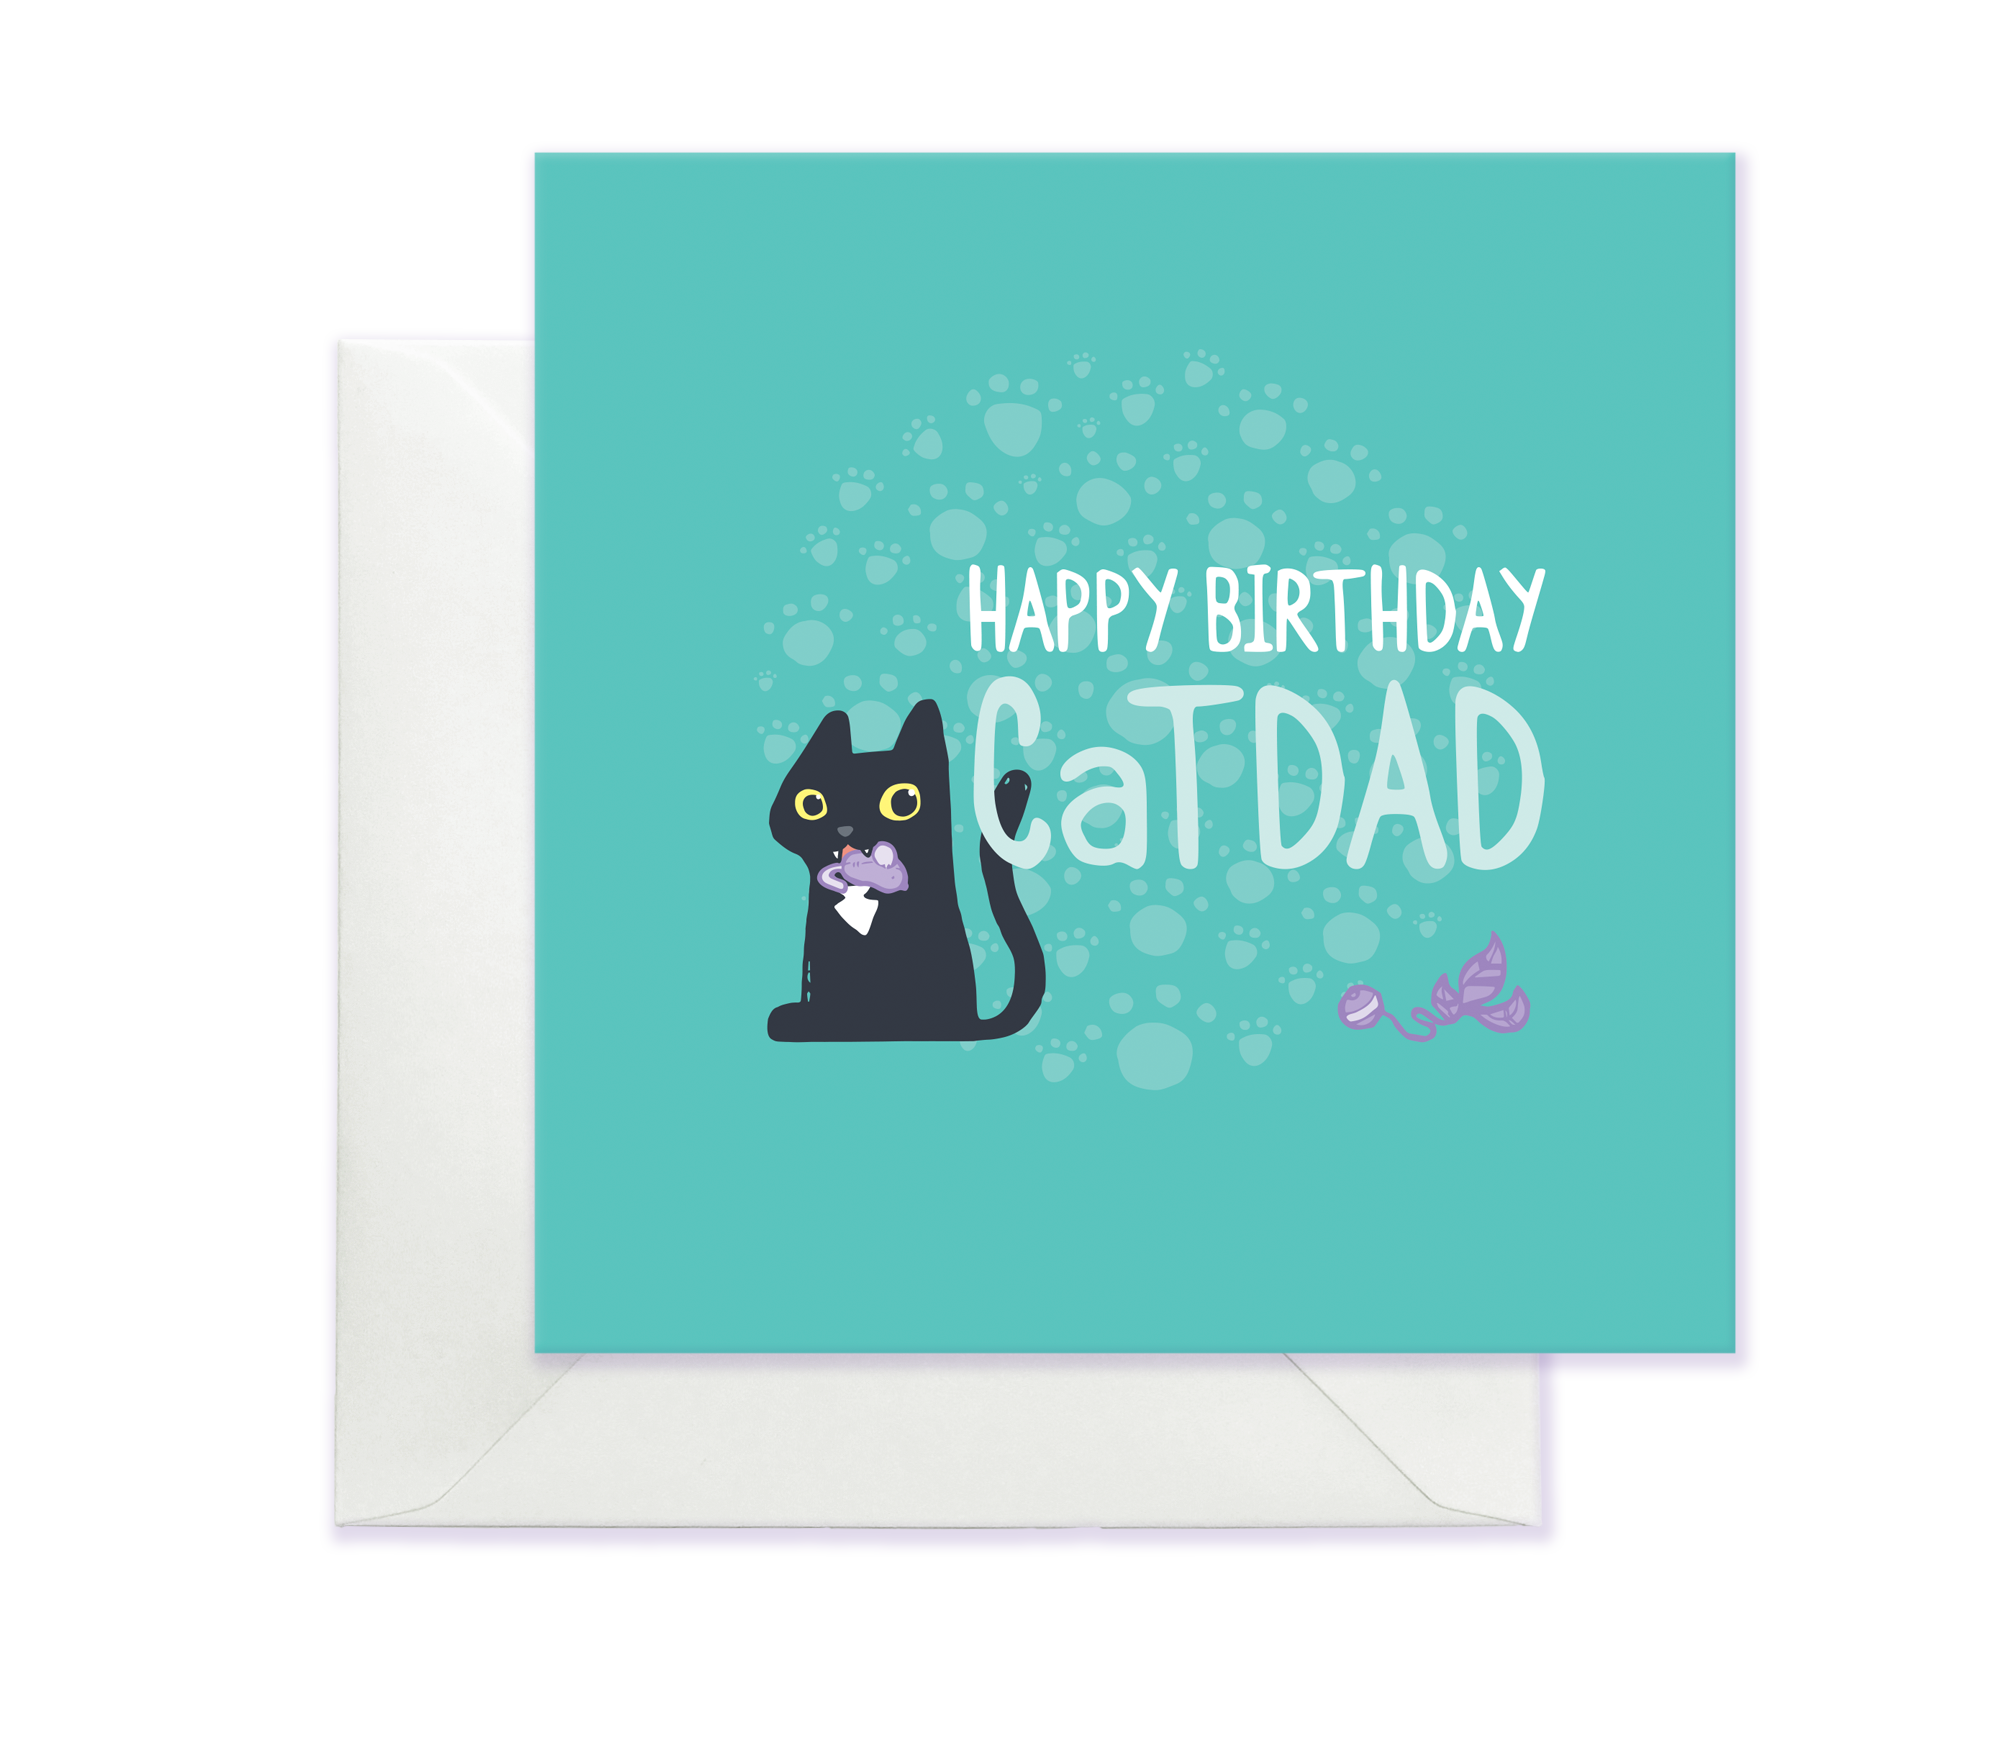 EARLY_2020_FLAT_HB_CATDAD_nobg.png